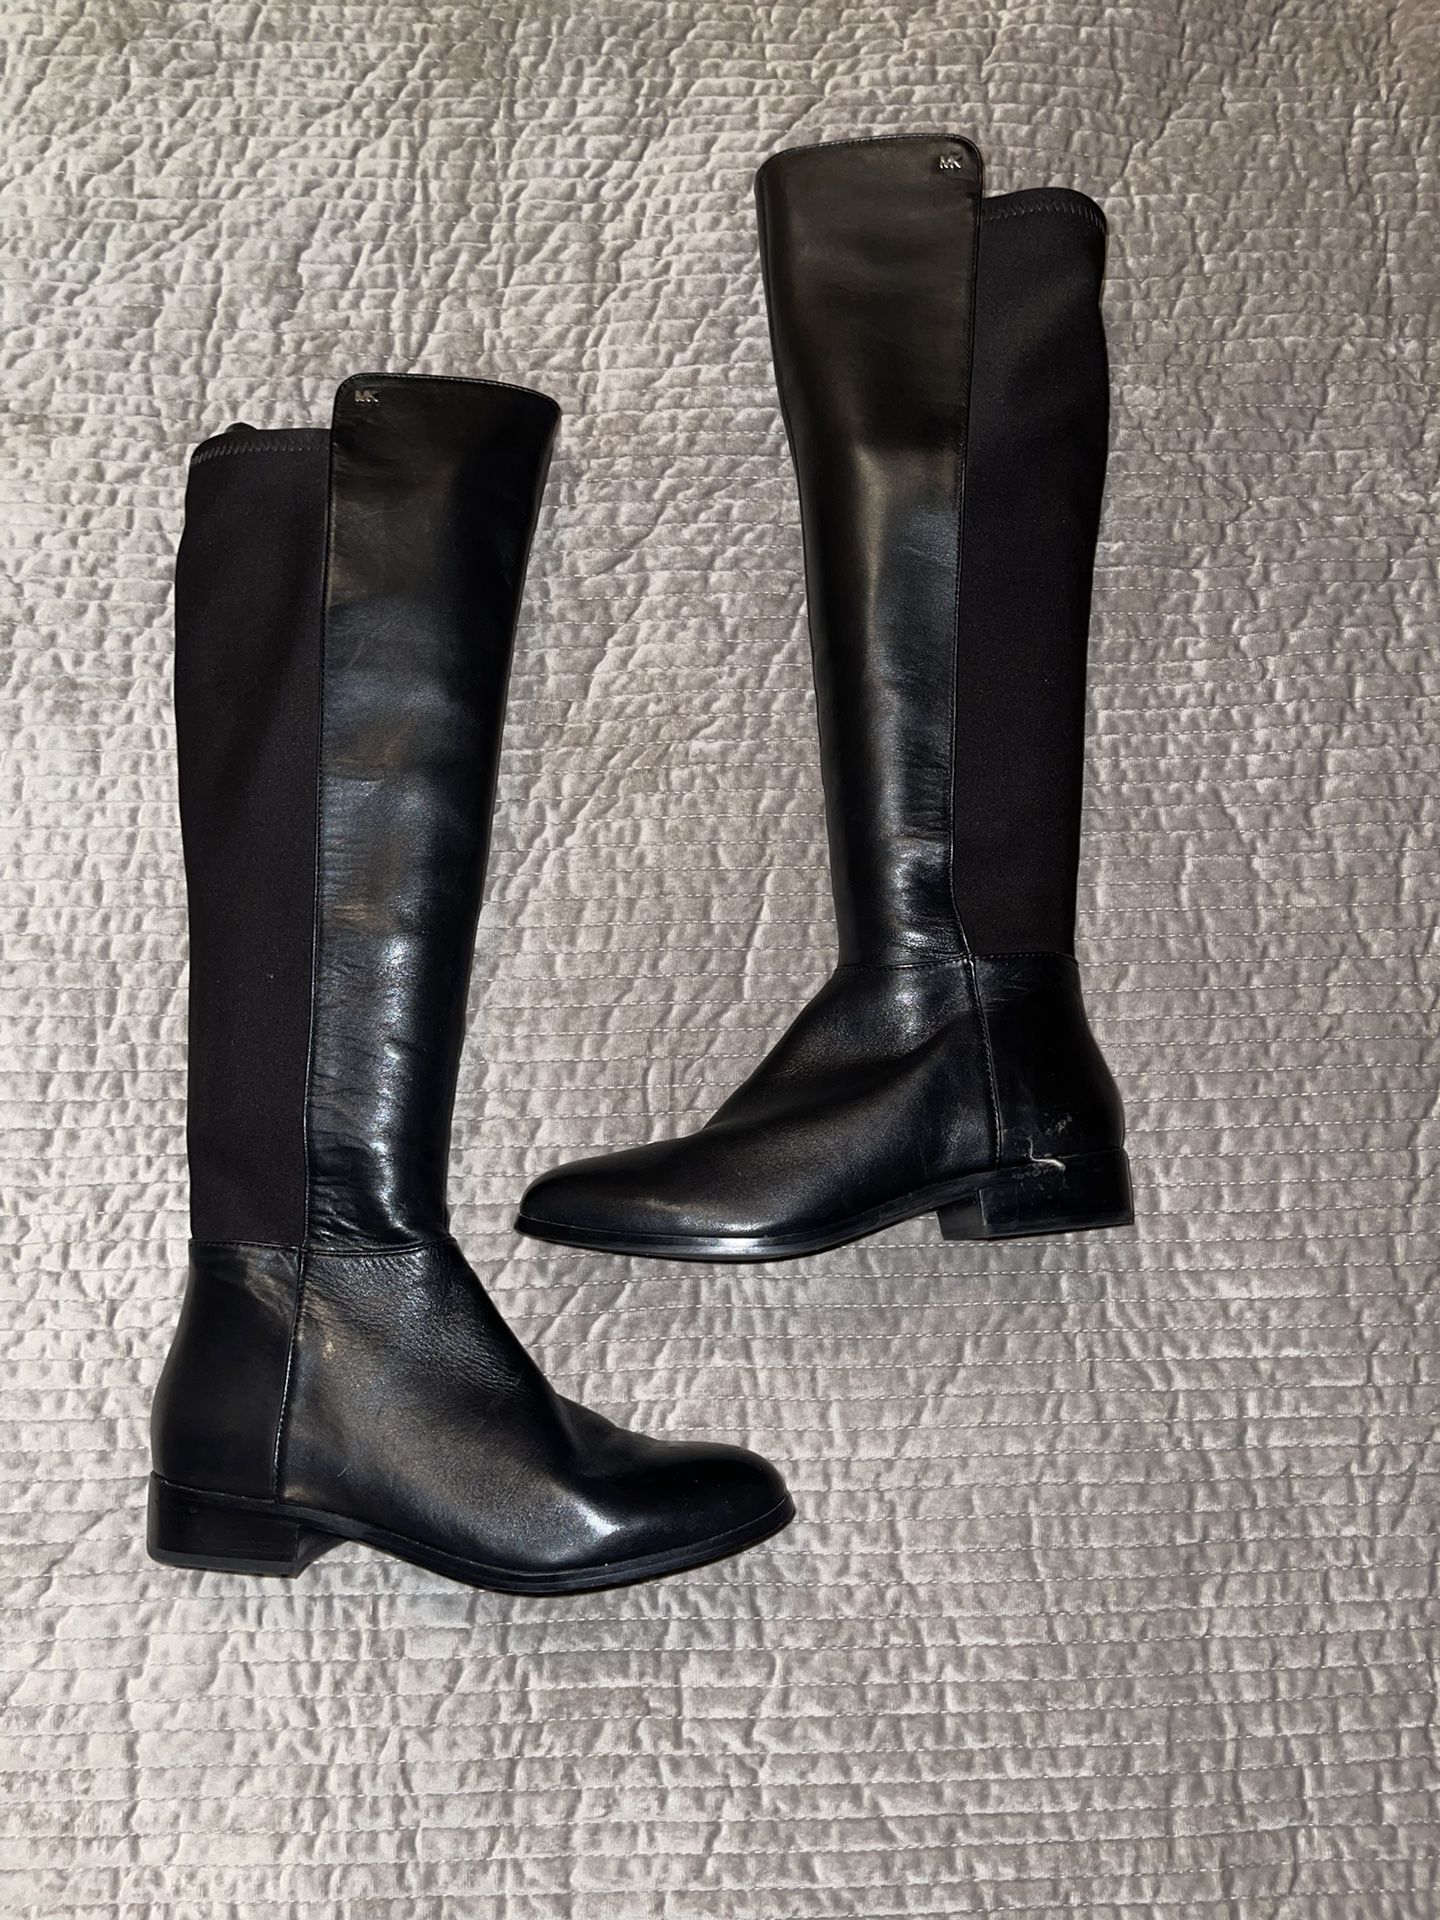 Michael Kors Bromley Women's Leather Over-The-Knee Boots - Black New Size  8W for Sale in Brooklyn, NY - OfferUp